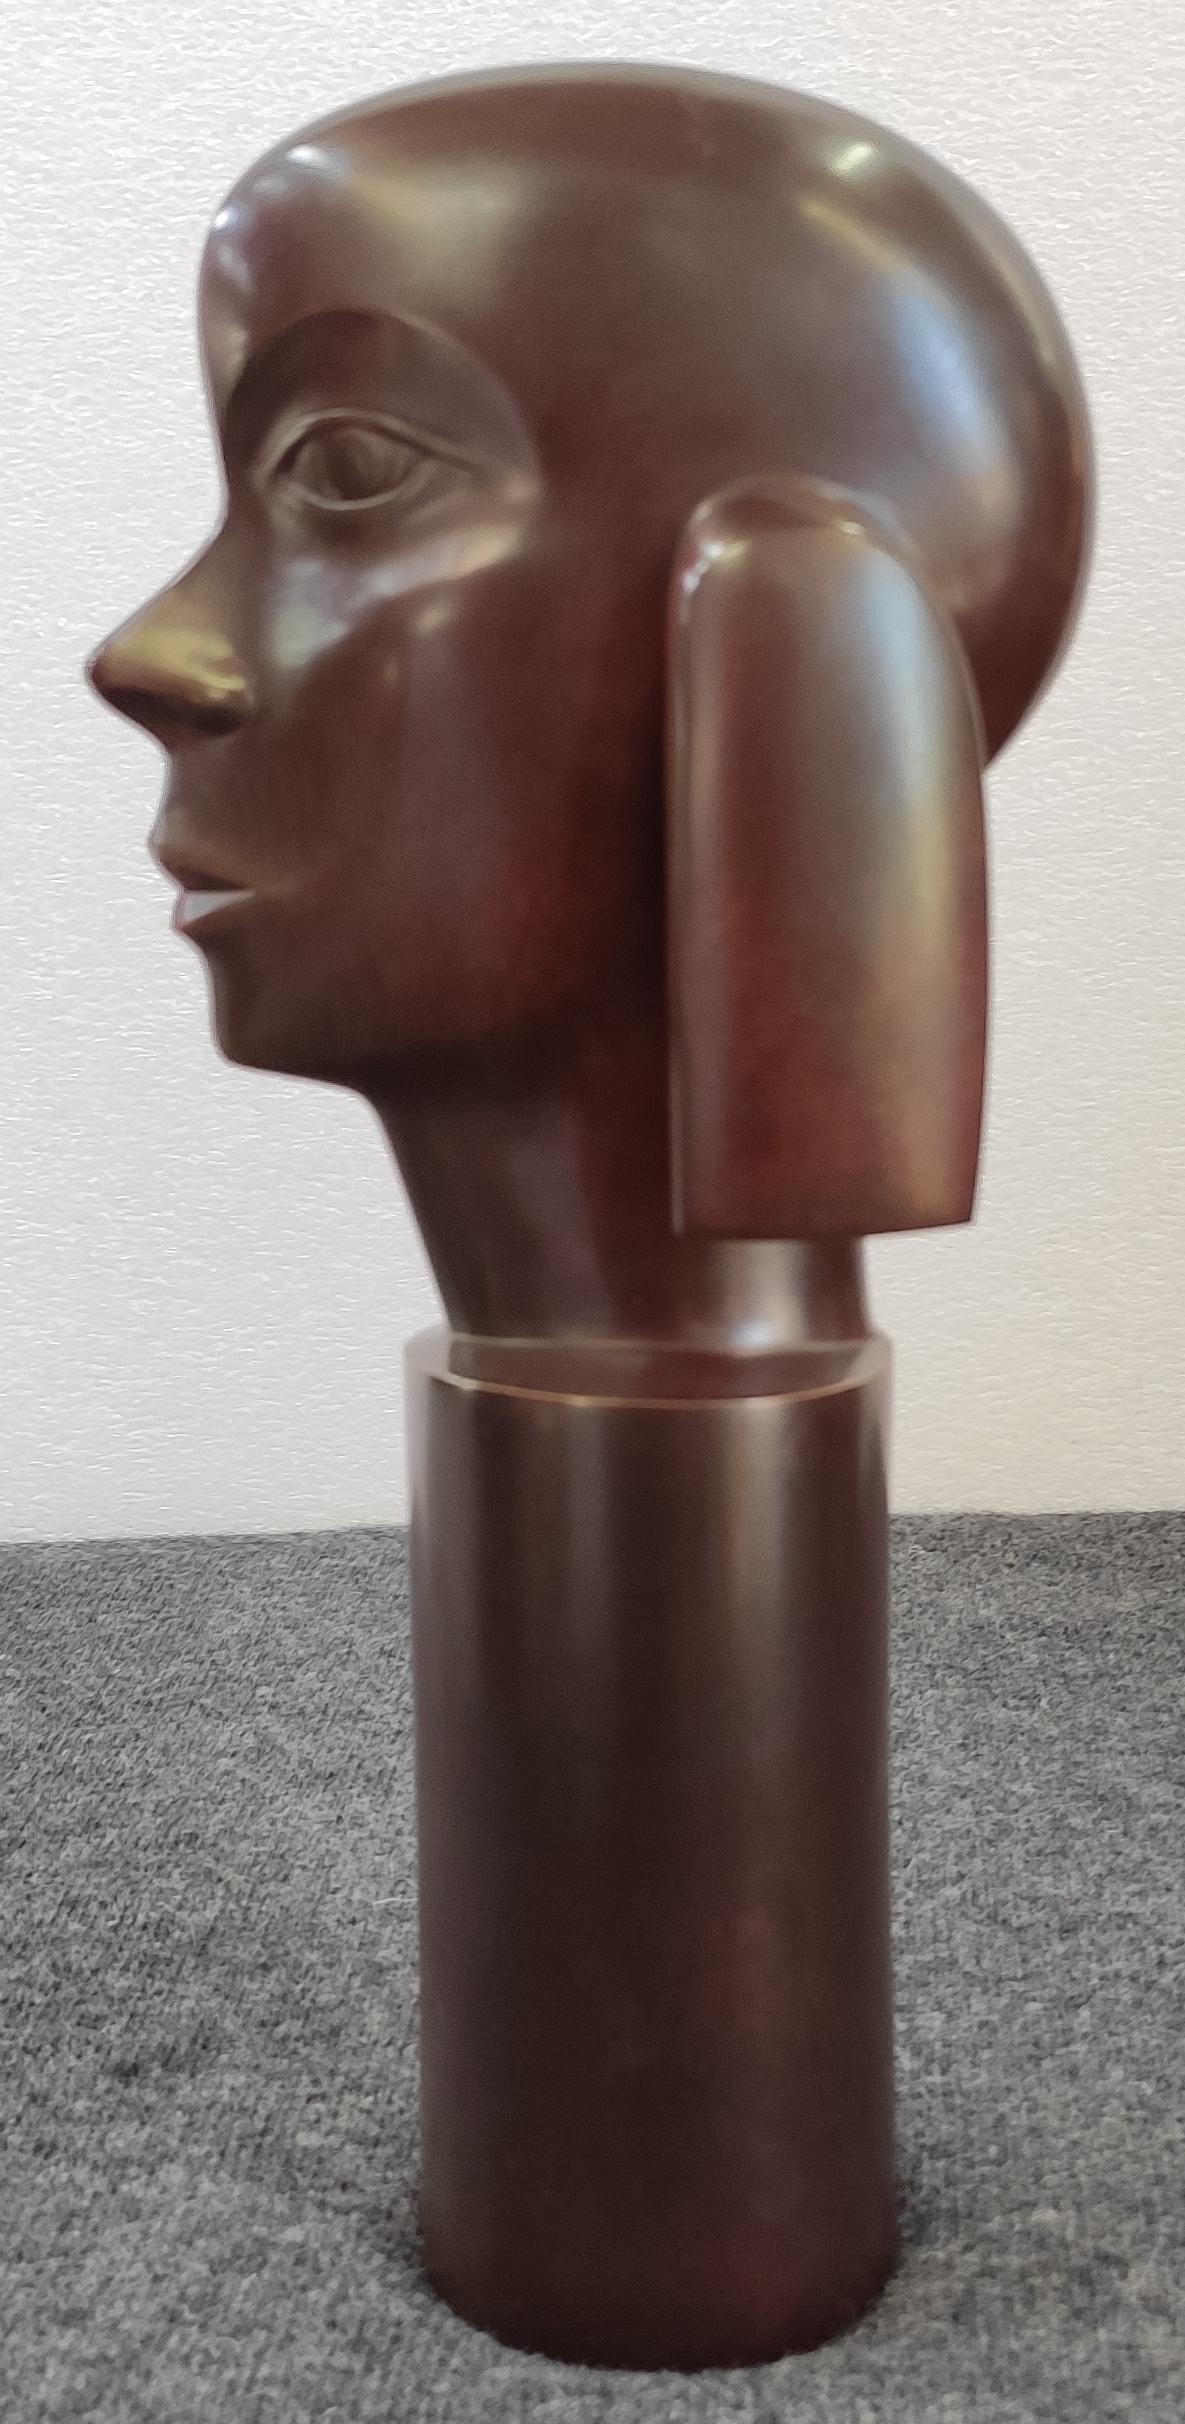 Aandacht Attention Bronze Sculpture Small Black Portrait Figurative In Stock

KOBE, pseudonym of Jacques Saelens, was a Belgian artist (Kortrijk, Belgium 1950 – Saint-Julien (Var), France 2014).

He combined the broad with sophistication. Two themes